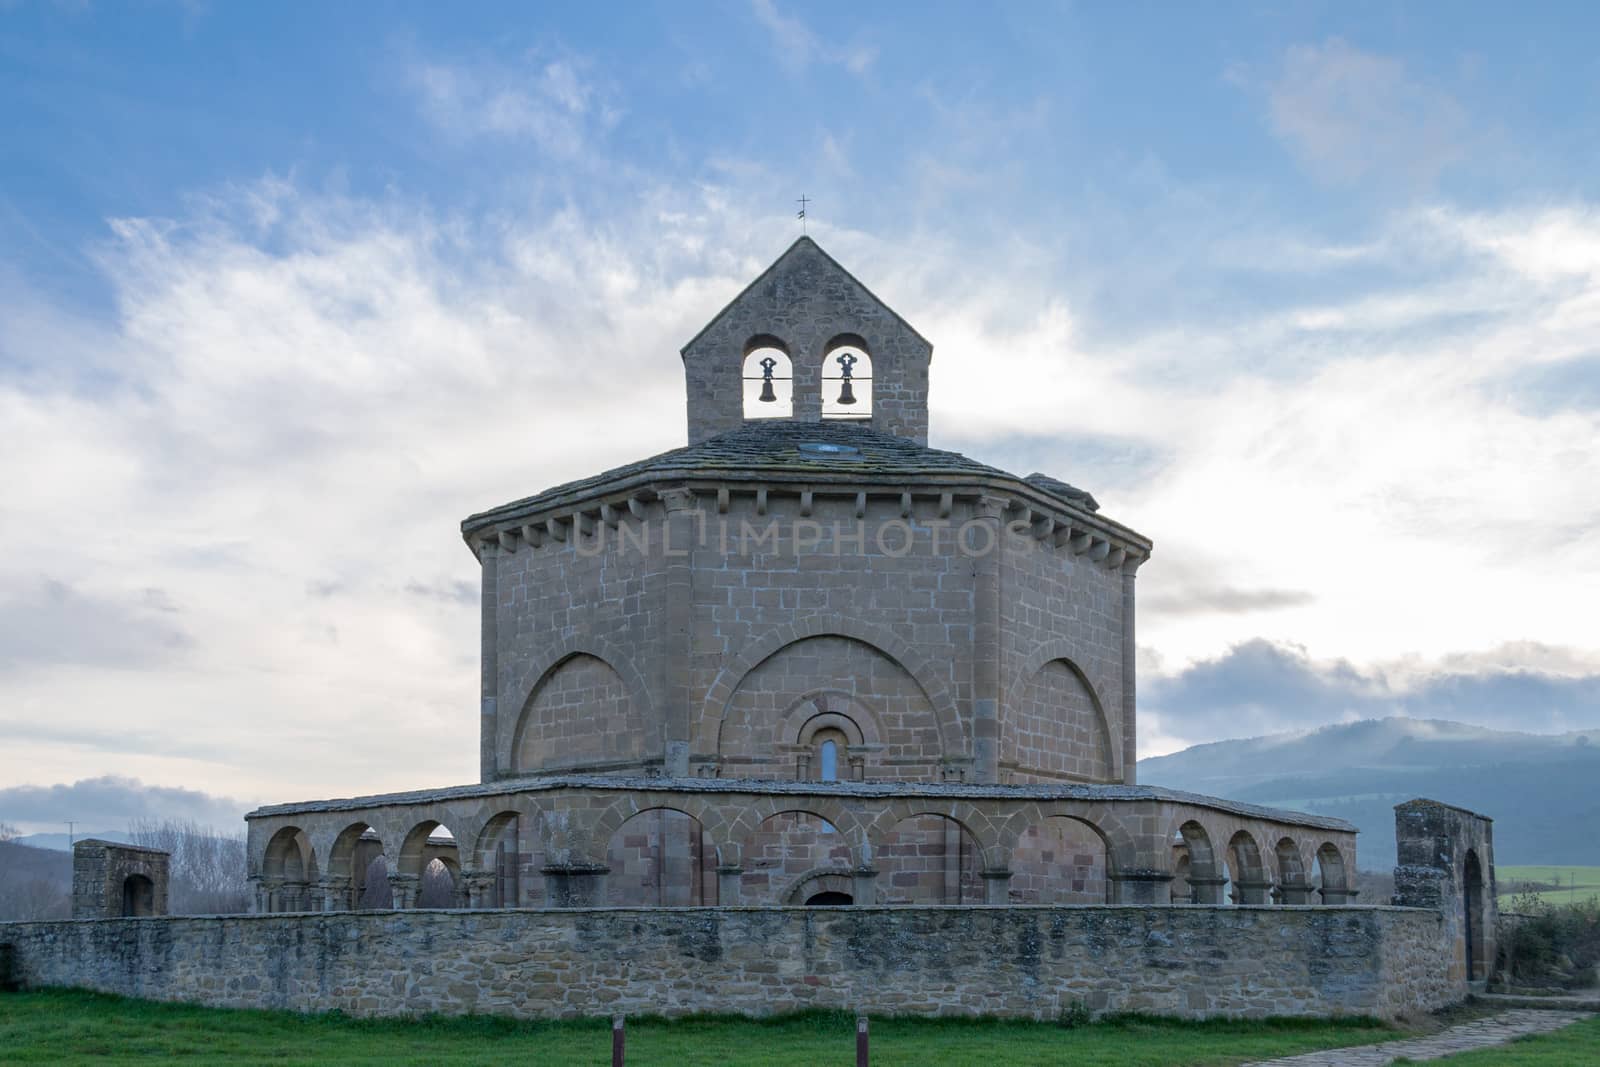 12th century Romanesque church located in the North of Spain which origin remains controversial.